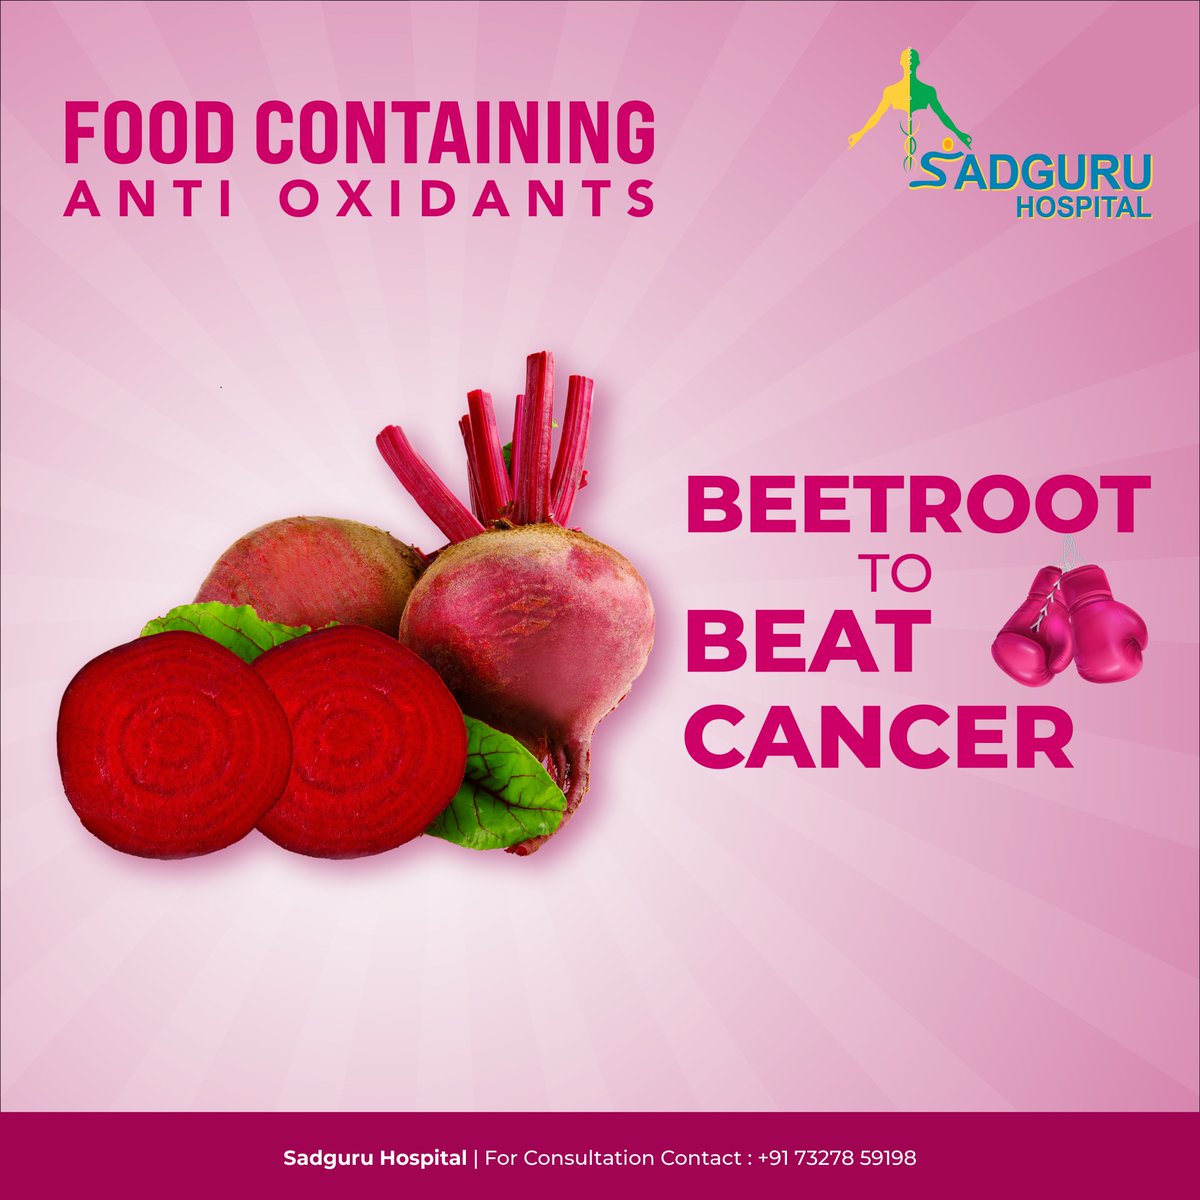 Beetroot as Antioxidant: Beetroot provides a holistic means to prevent cancer & manage undesired effects of chemotherapy. 

#SadguruHospital #SadguruHospitalCuttack #Sadguru #BreastCancer #CancerPrevention #CancerNutrition #AntiCancer #Antioxdants #Vitamins #FoodForCancer